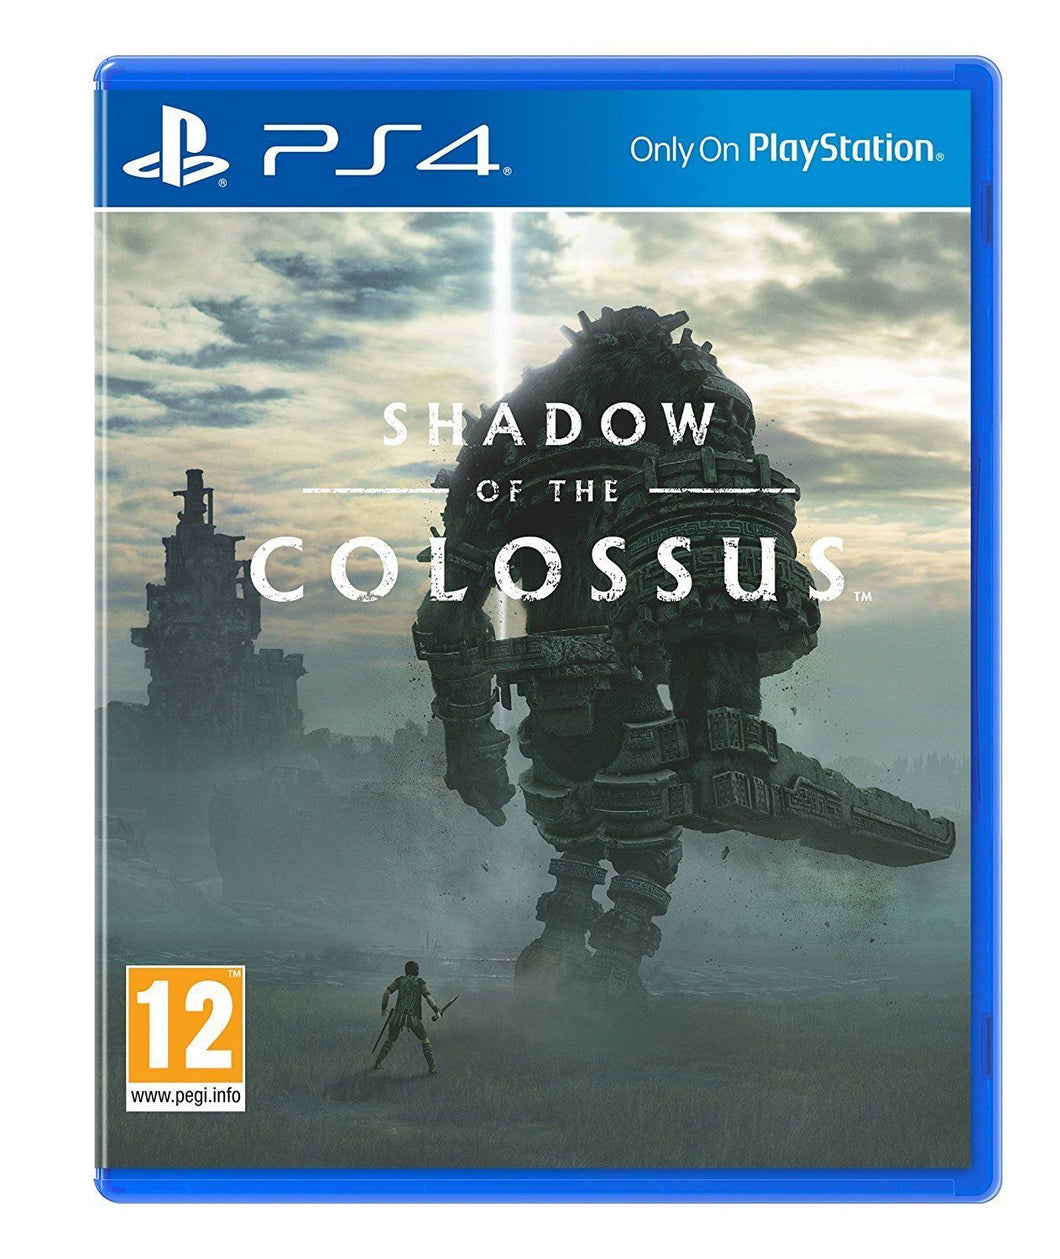 JUEGO SONY PS4 SHADOW OF THE COLOSSUS REMASTERED